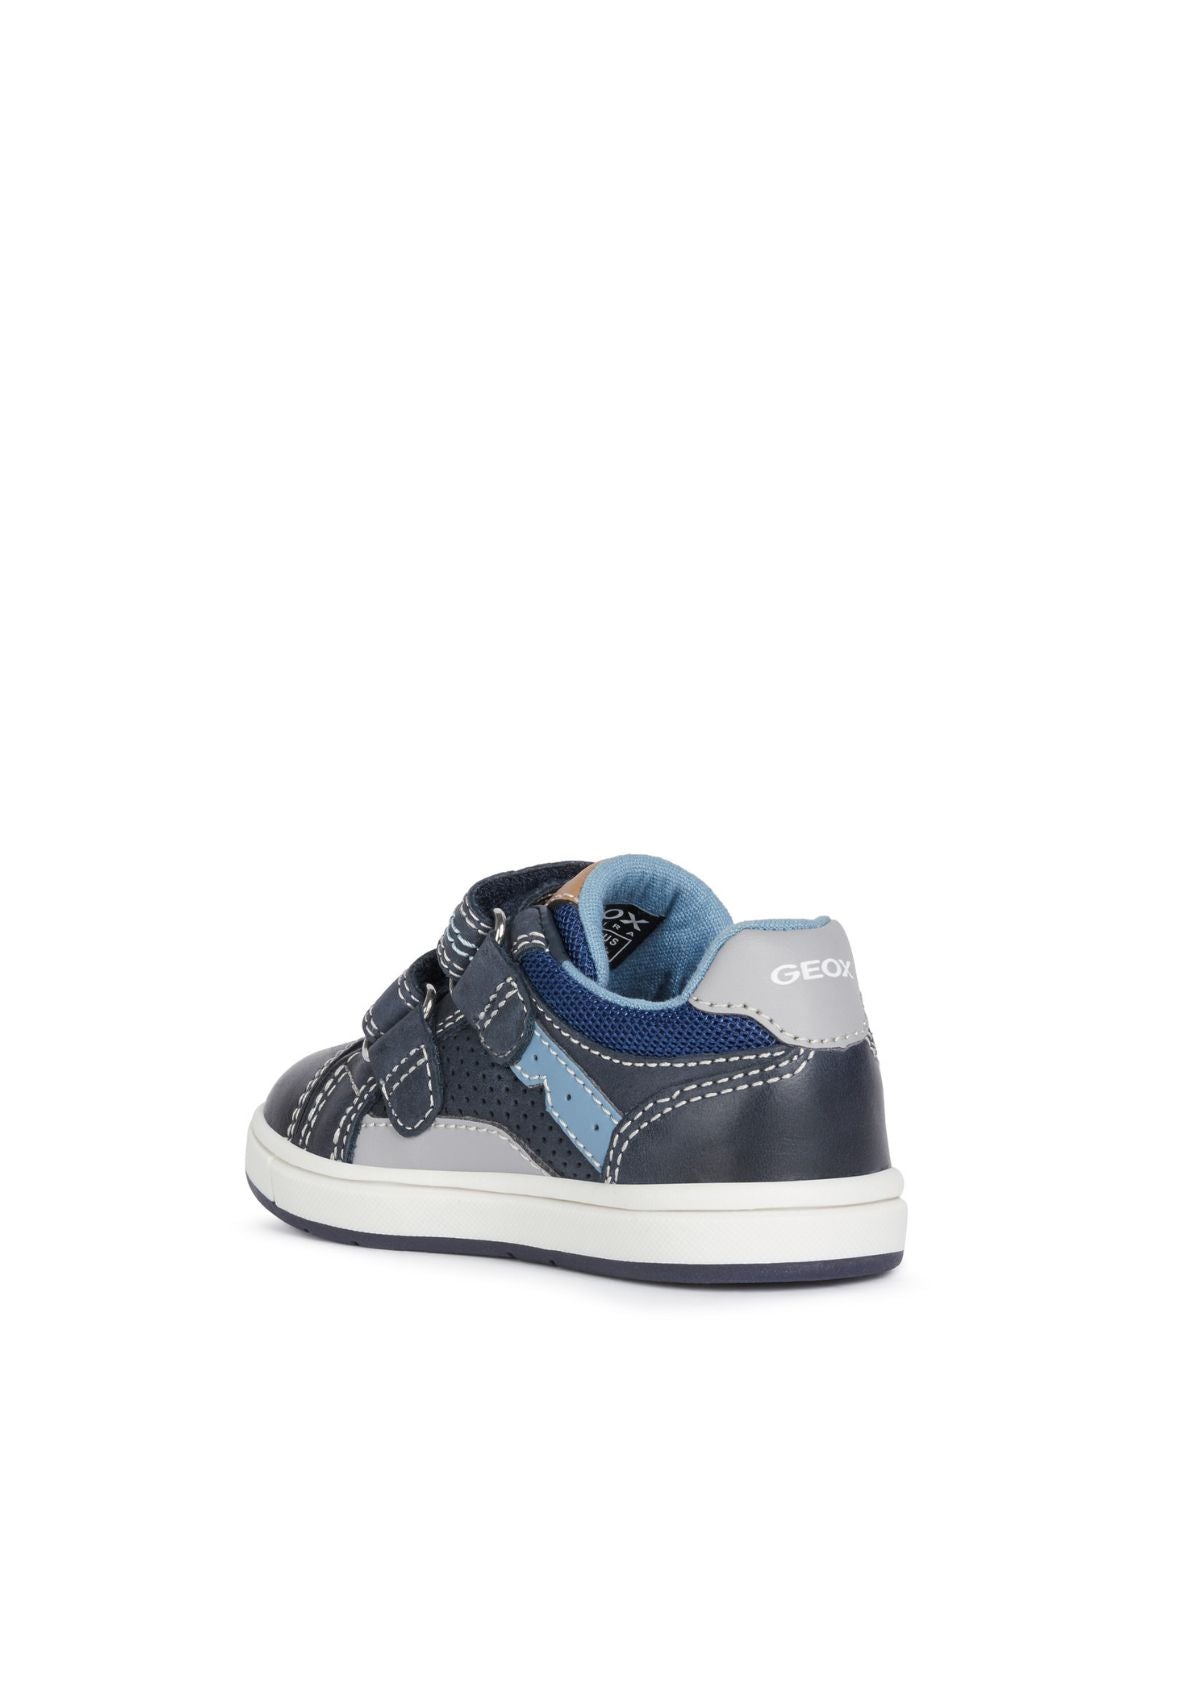 Geox Baby Boys Trainers TROTTOLA Navy White back